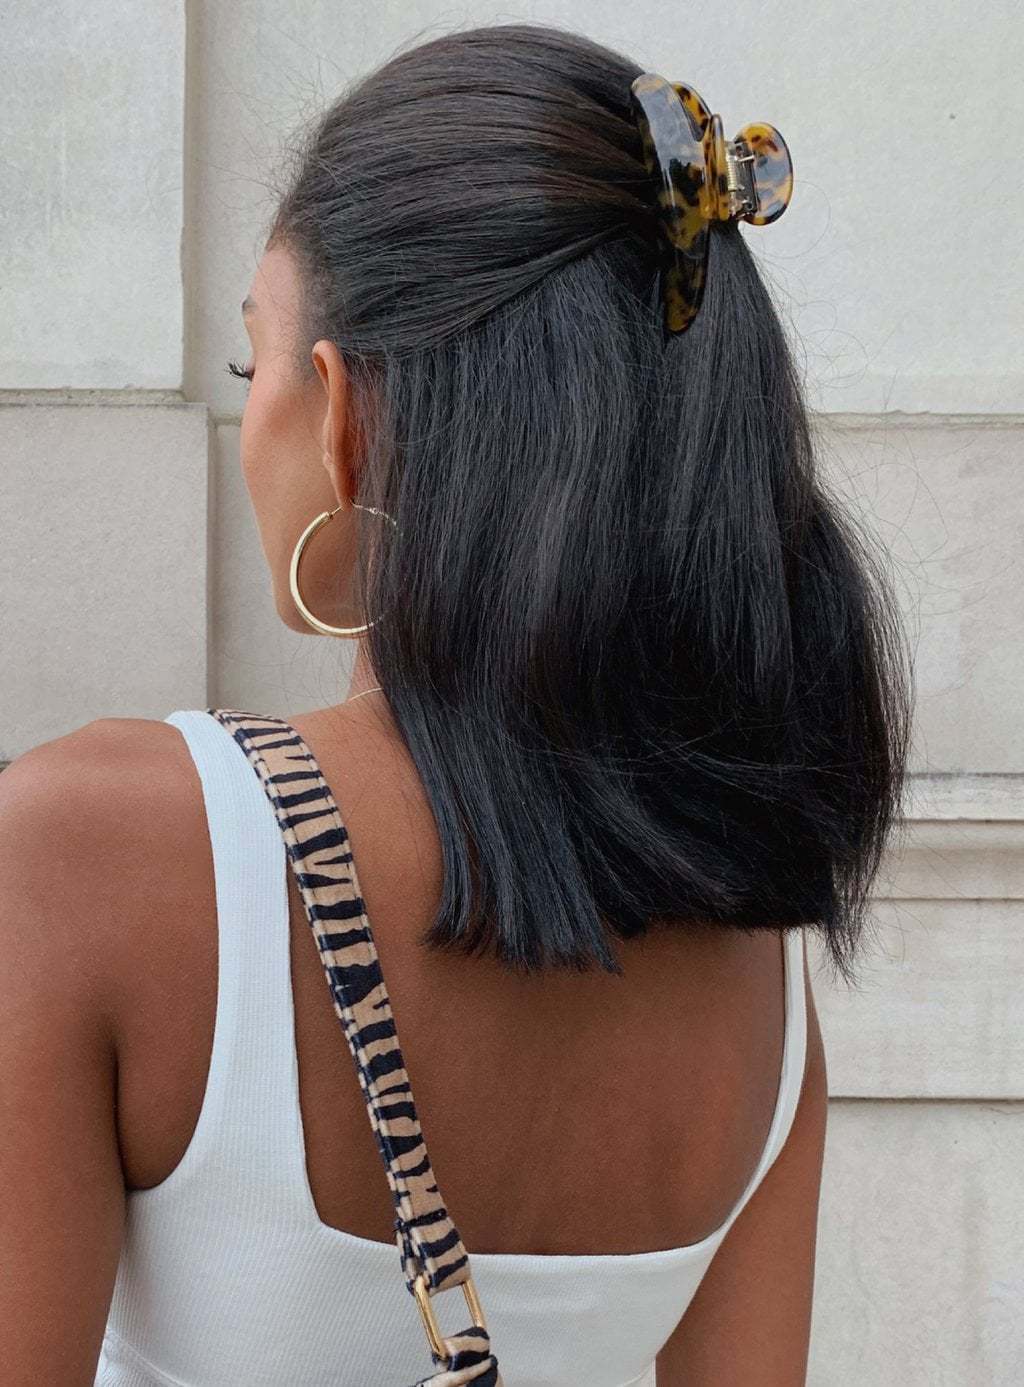 How to Style Short Hair in 37 Chic, Easy Ways